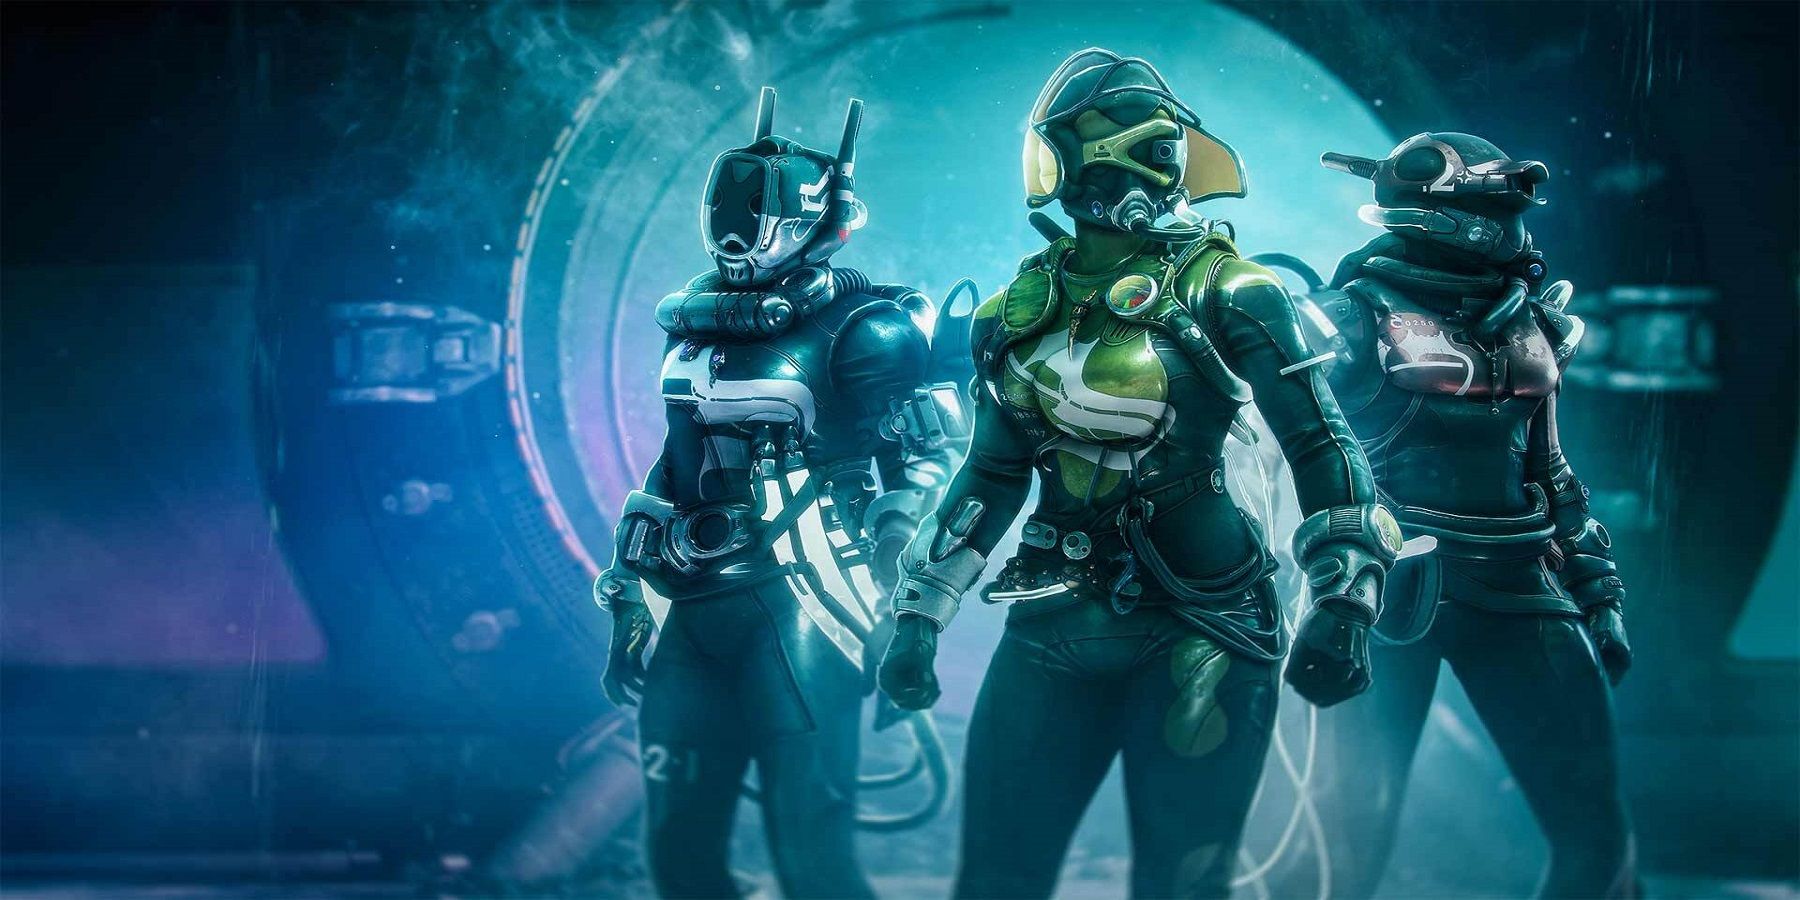 A pair of Destiny 2 players turn their guardians into the universe's versions of Spider-Man and Green Goblin.